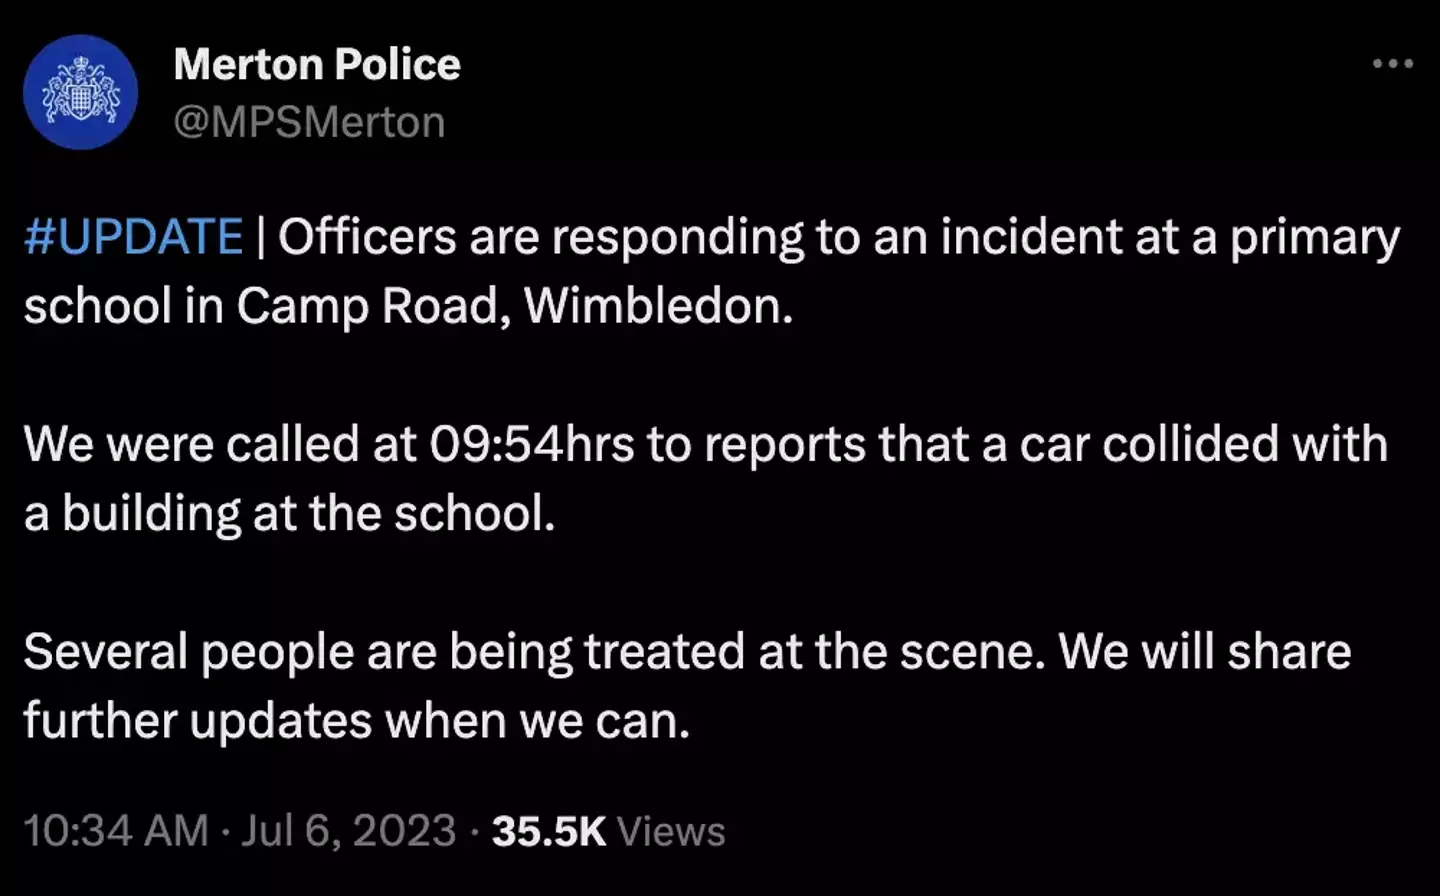 The incident took place in Camp Road, Wimbledon.